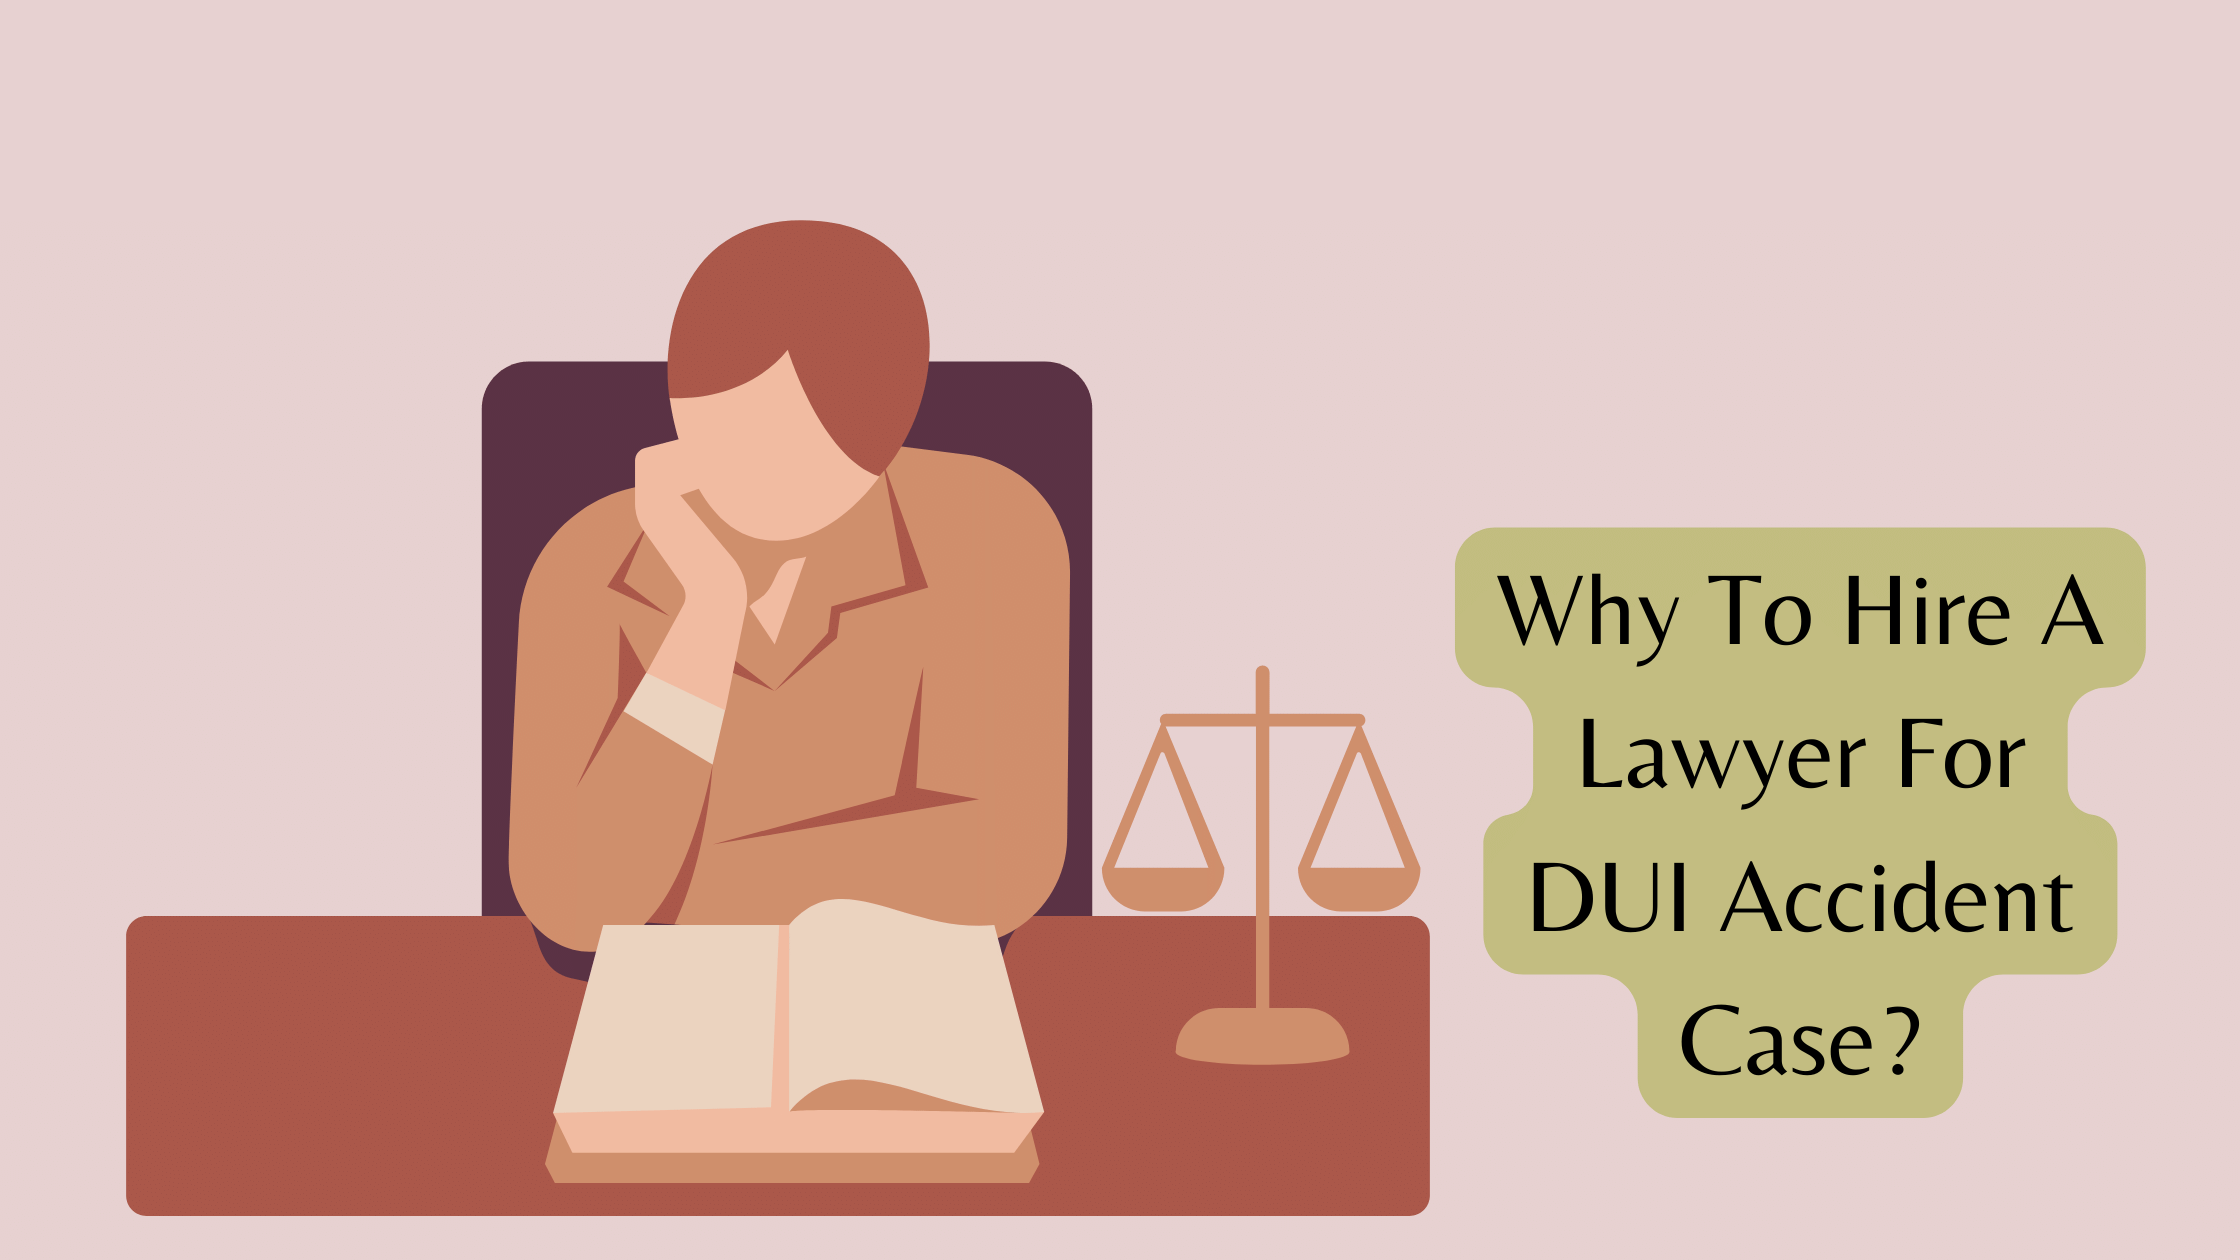 Hire A Lawyer For DUI Accident Case